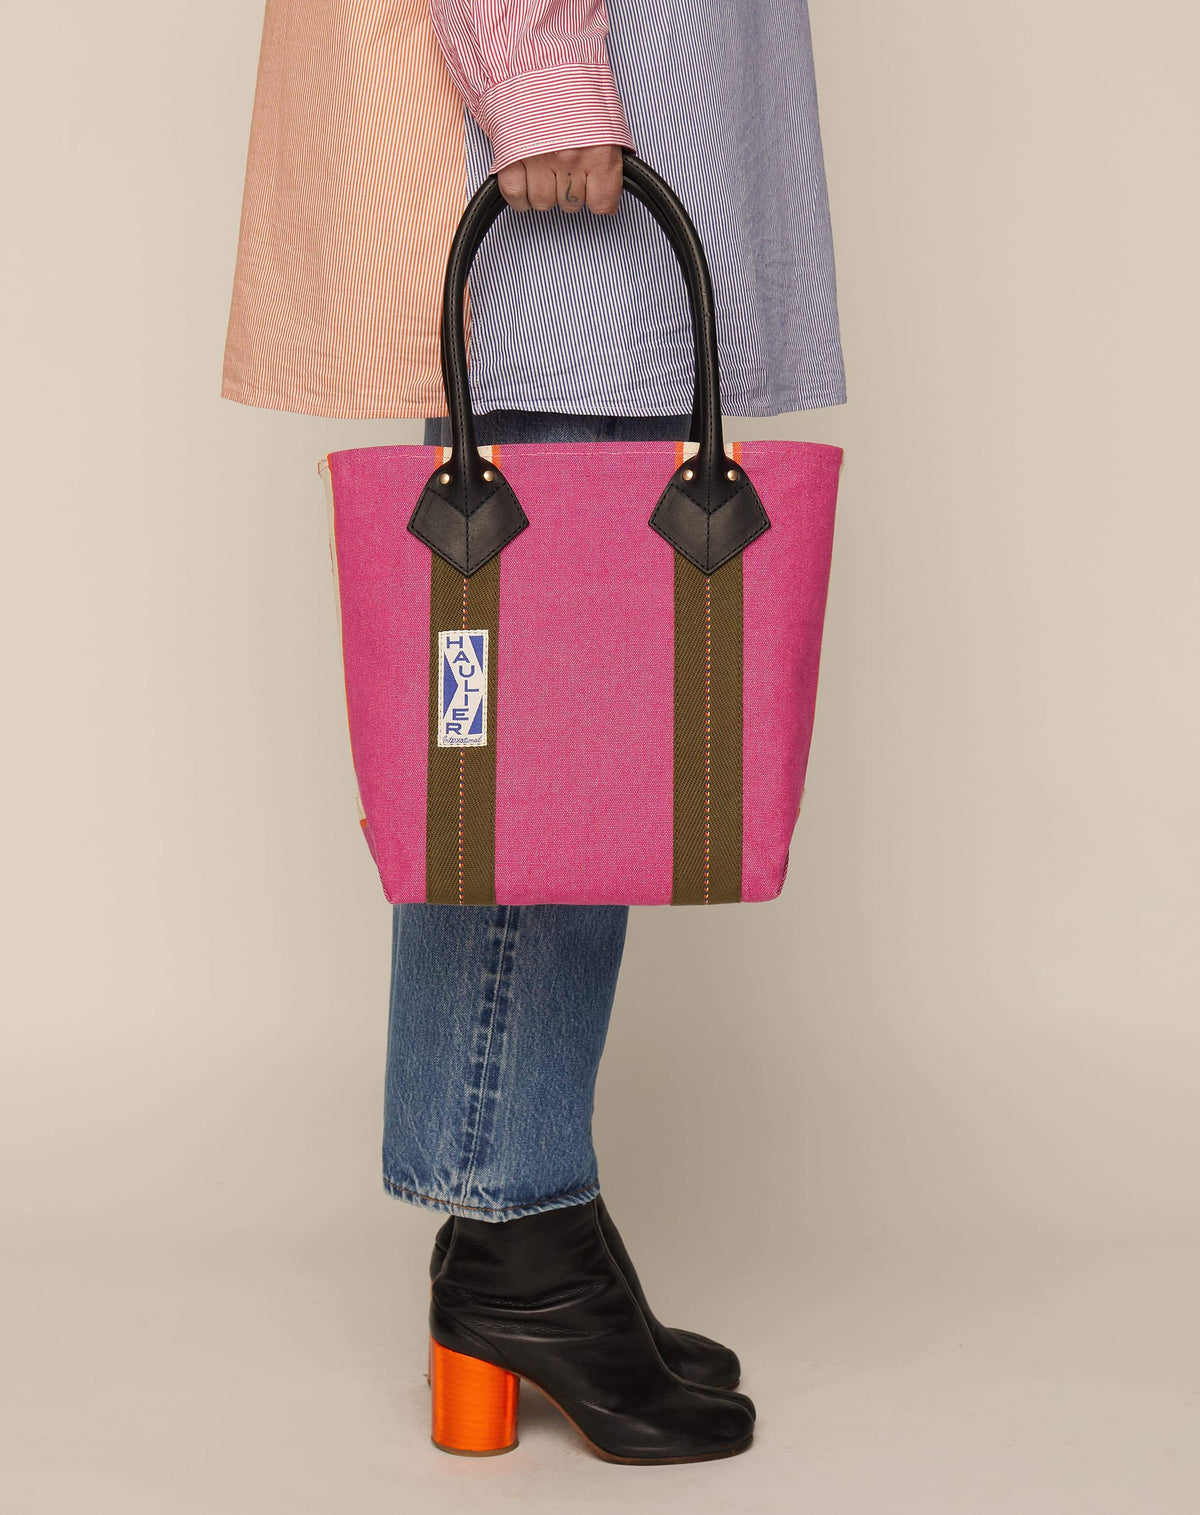 Image of person in jeans, boots and striped shirt holding a small classic canvas tote bag in fuchsia colour with black leather handles and contrasting stripes.